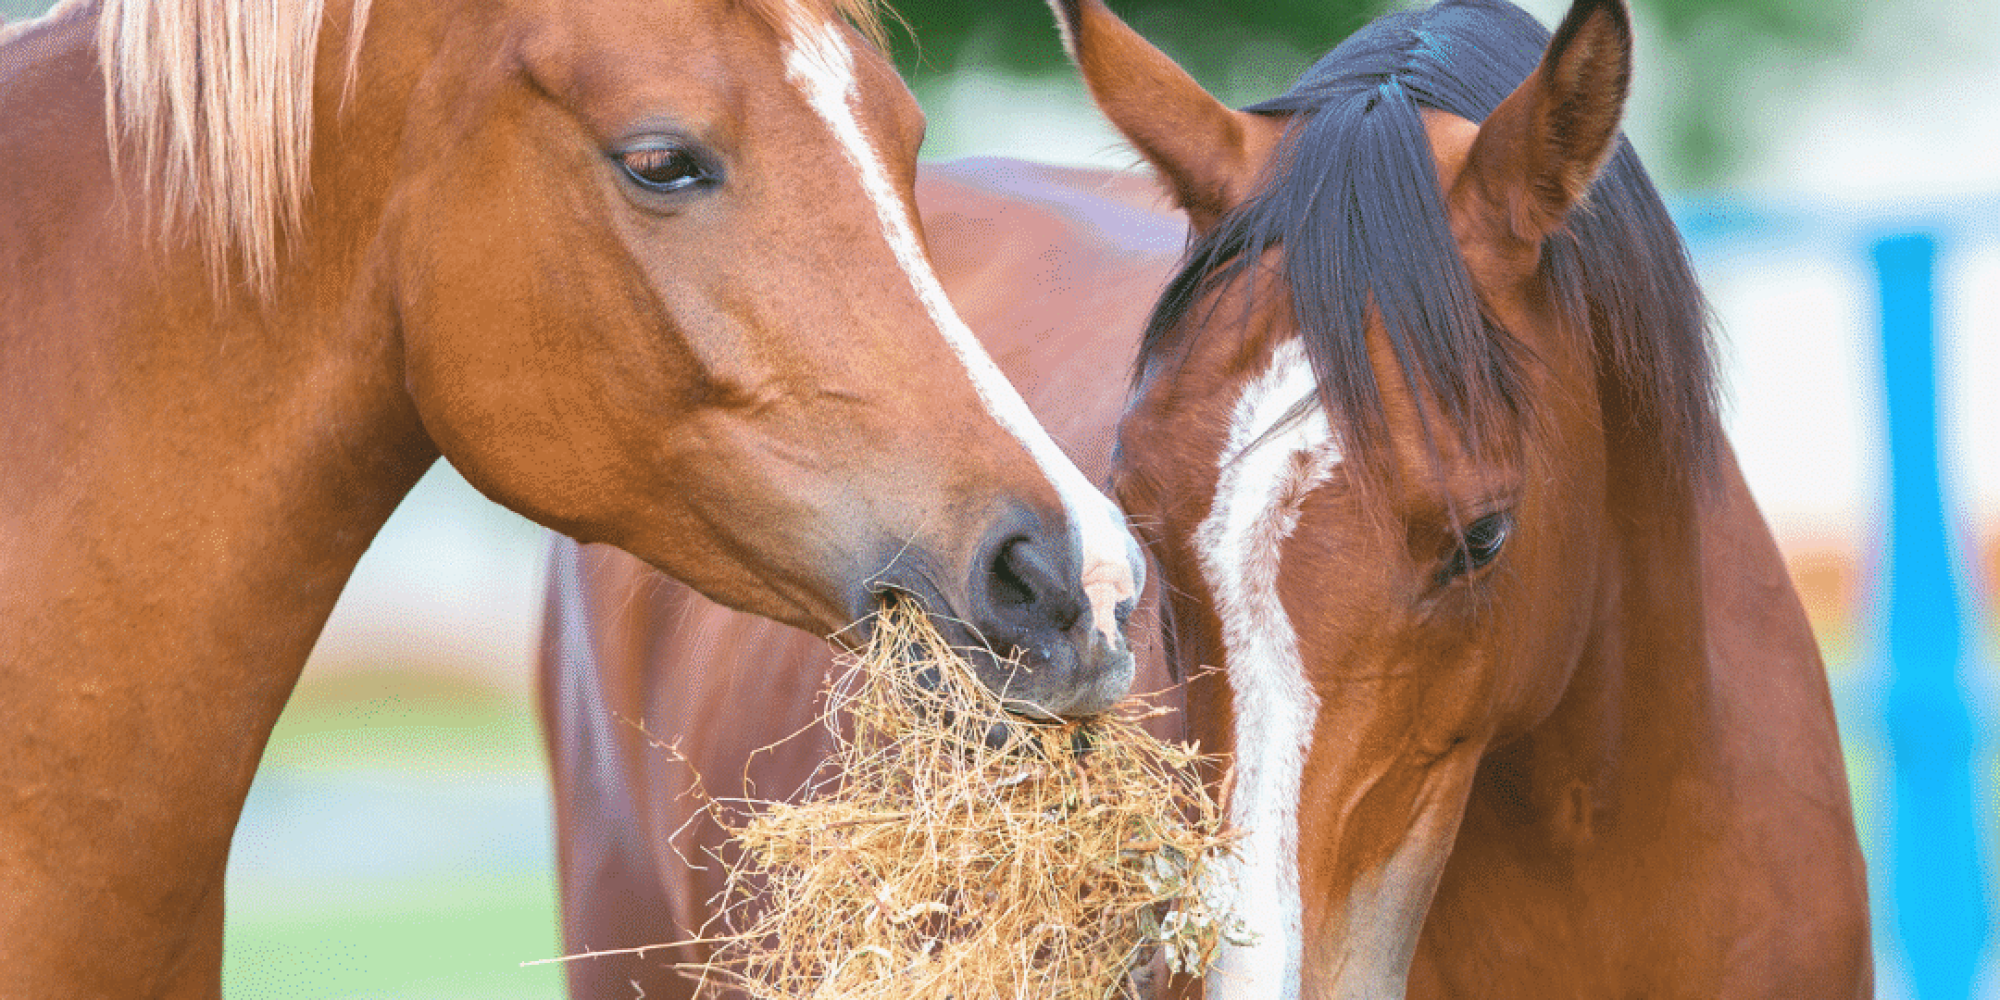 two horses eating hay outside